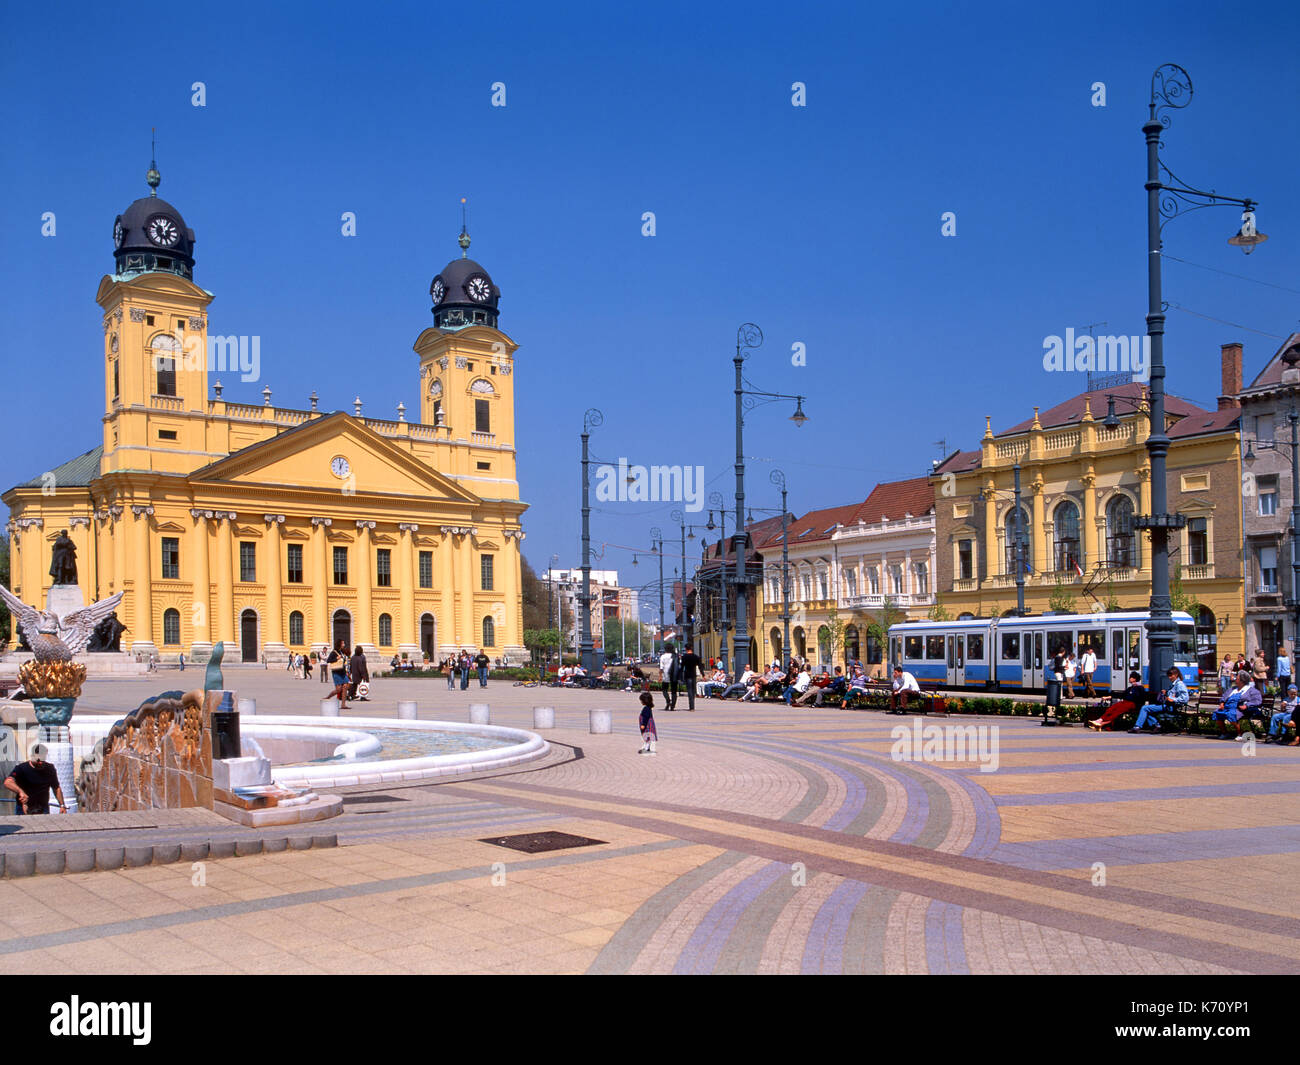 Debrecen, Hungary. Calvinist Great Church / Great Reformed Church (Neo classical - 1823) at north end of Kossuth tér (square) Fountain Stock Photo